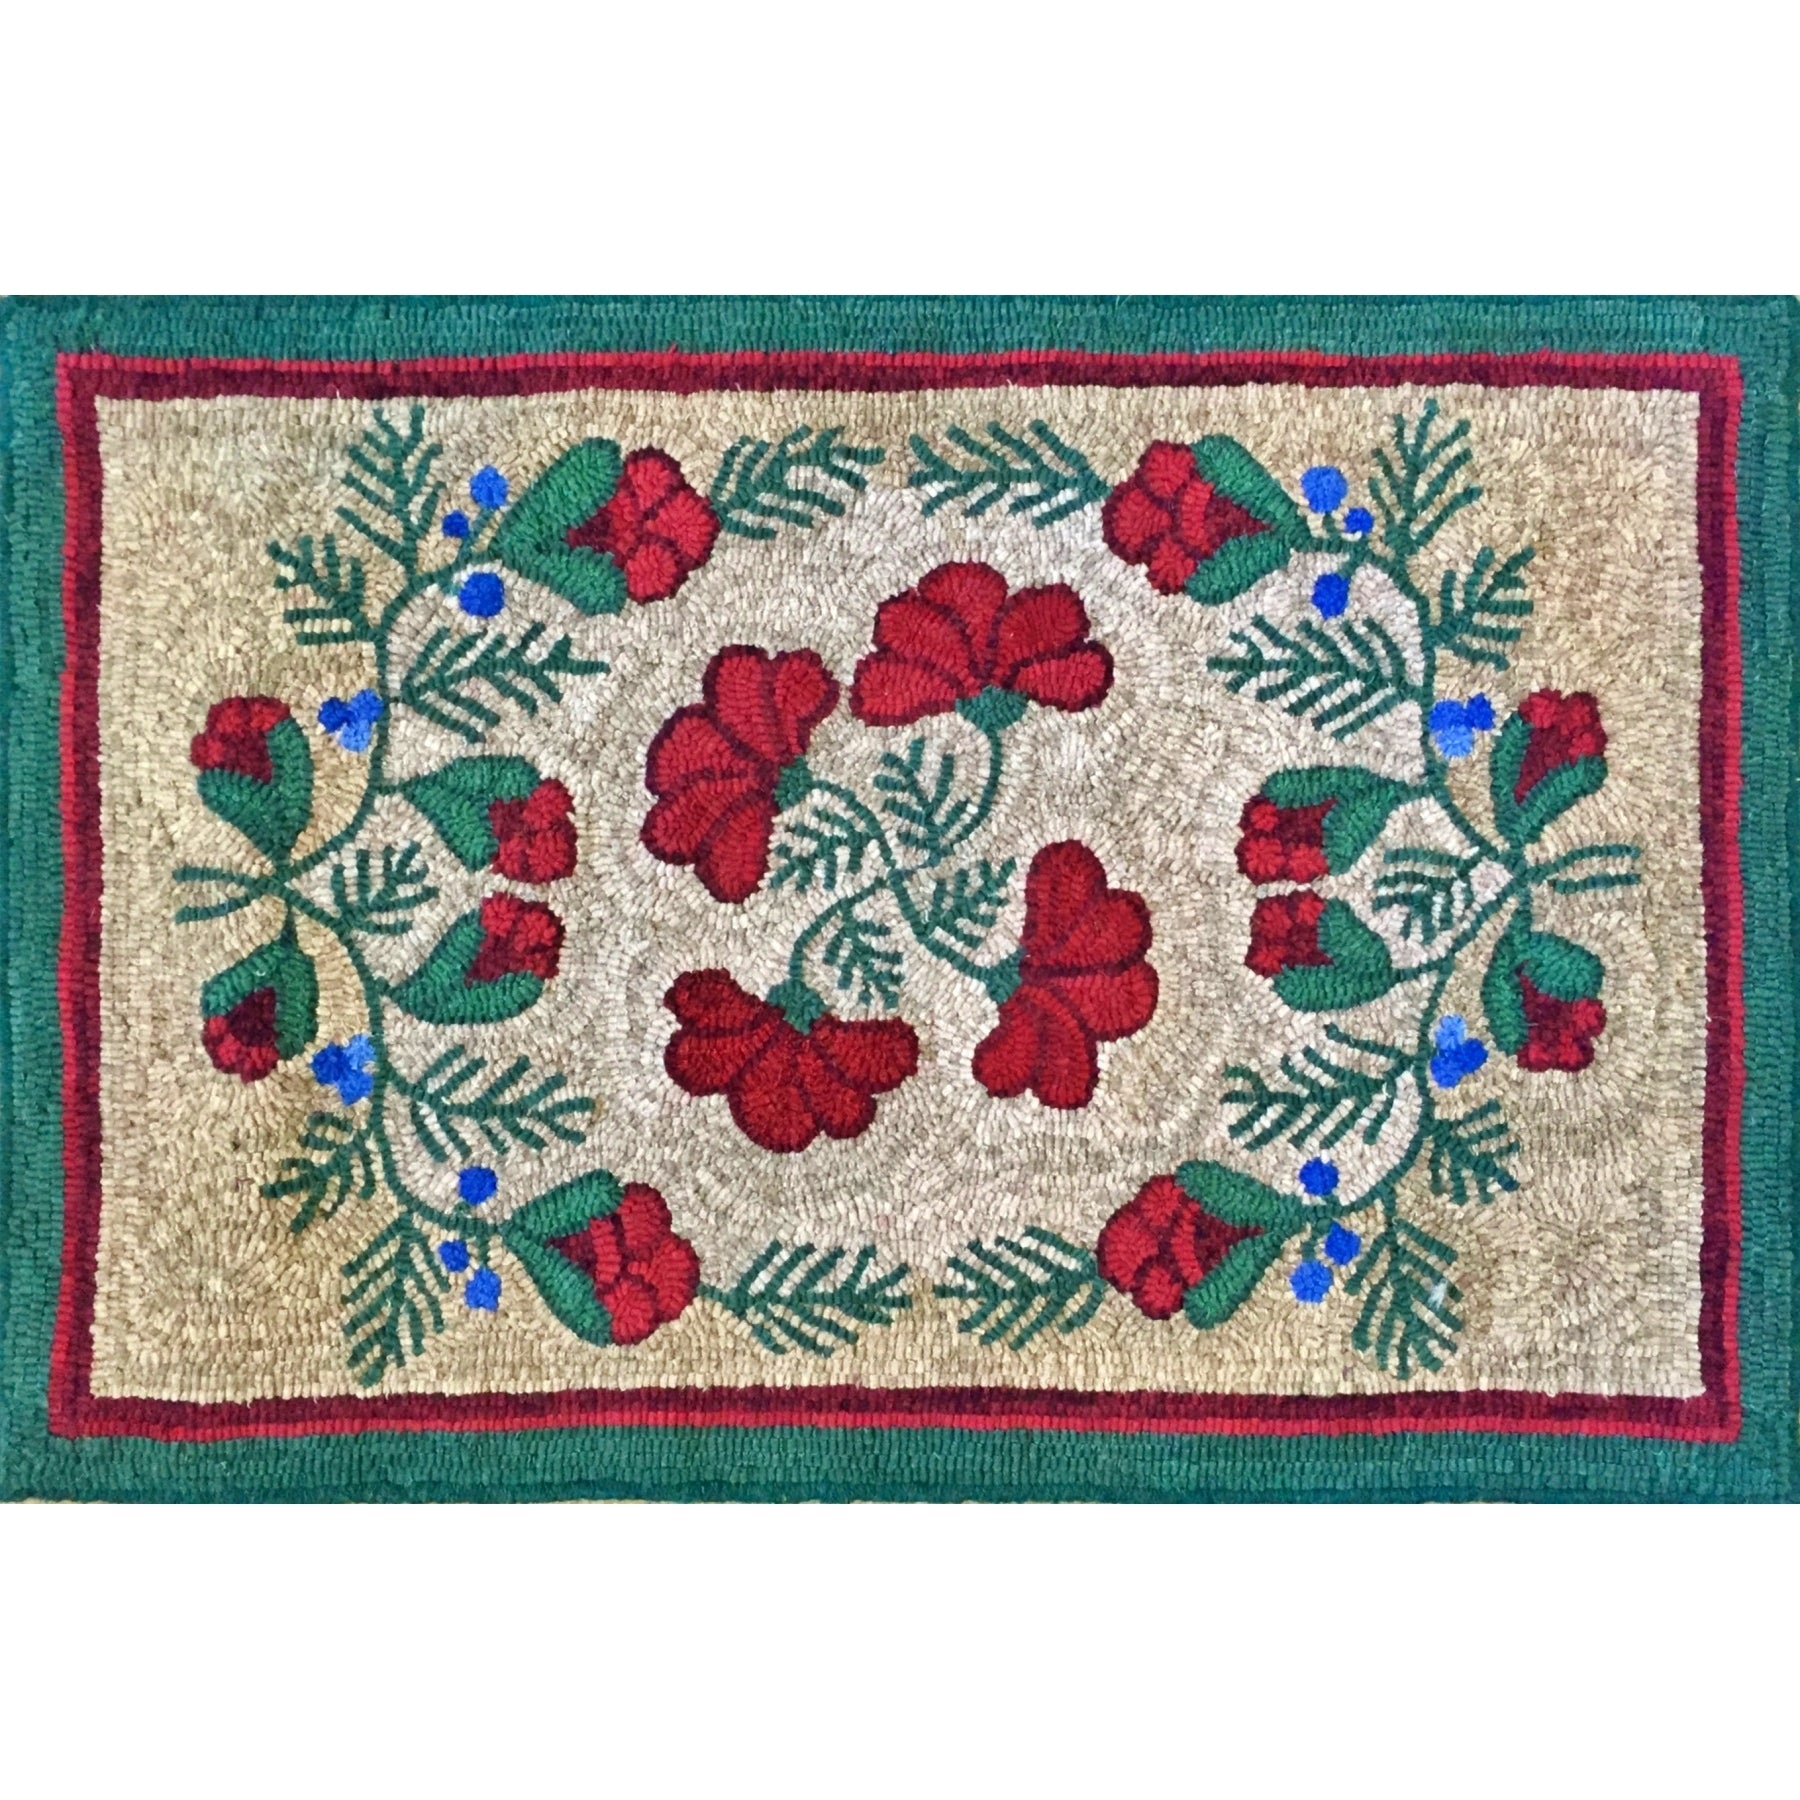 Boughs & Buds, rug hooked by Margaret Bedle